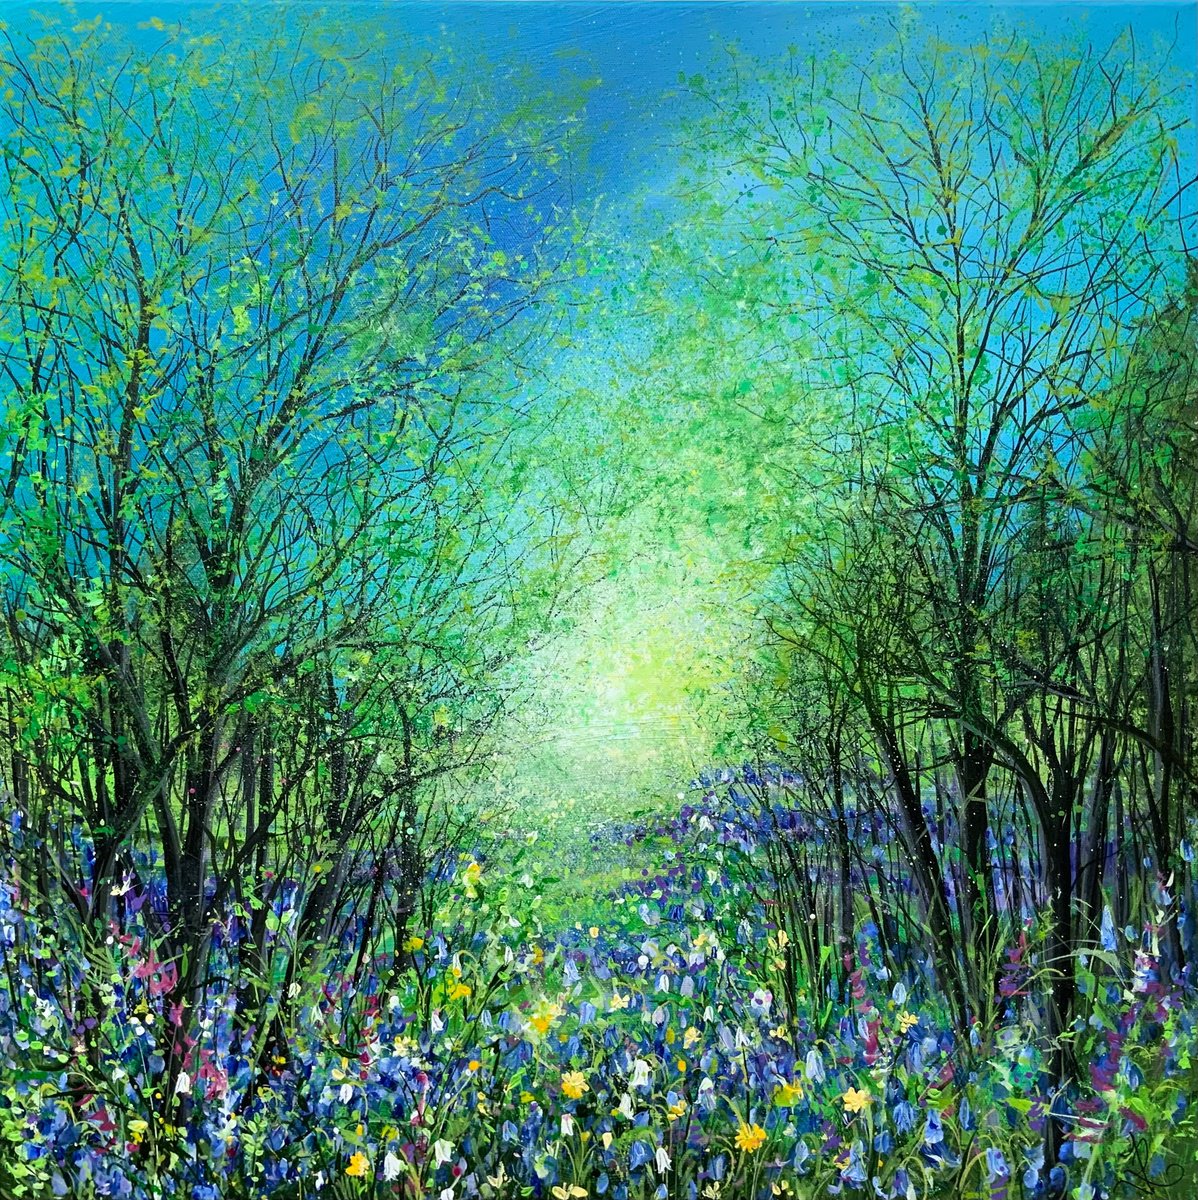 Bluebells and Dandelions by Jan Rogers